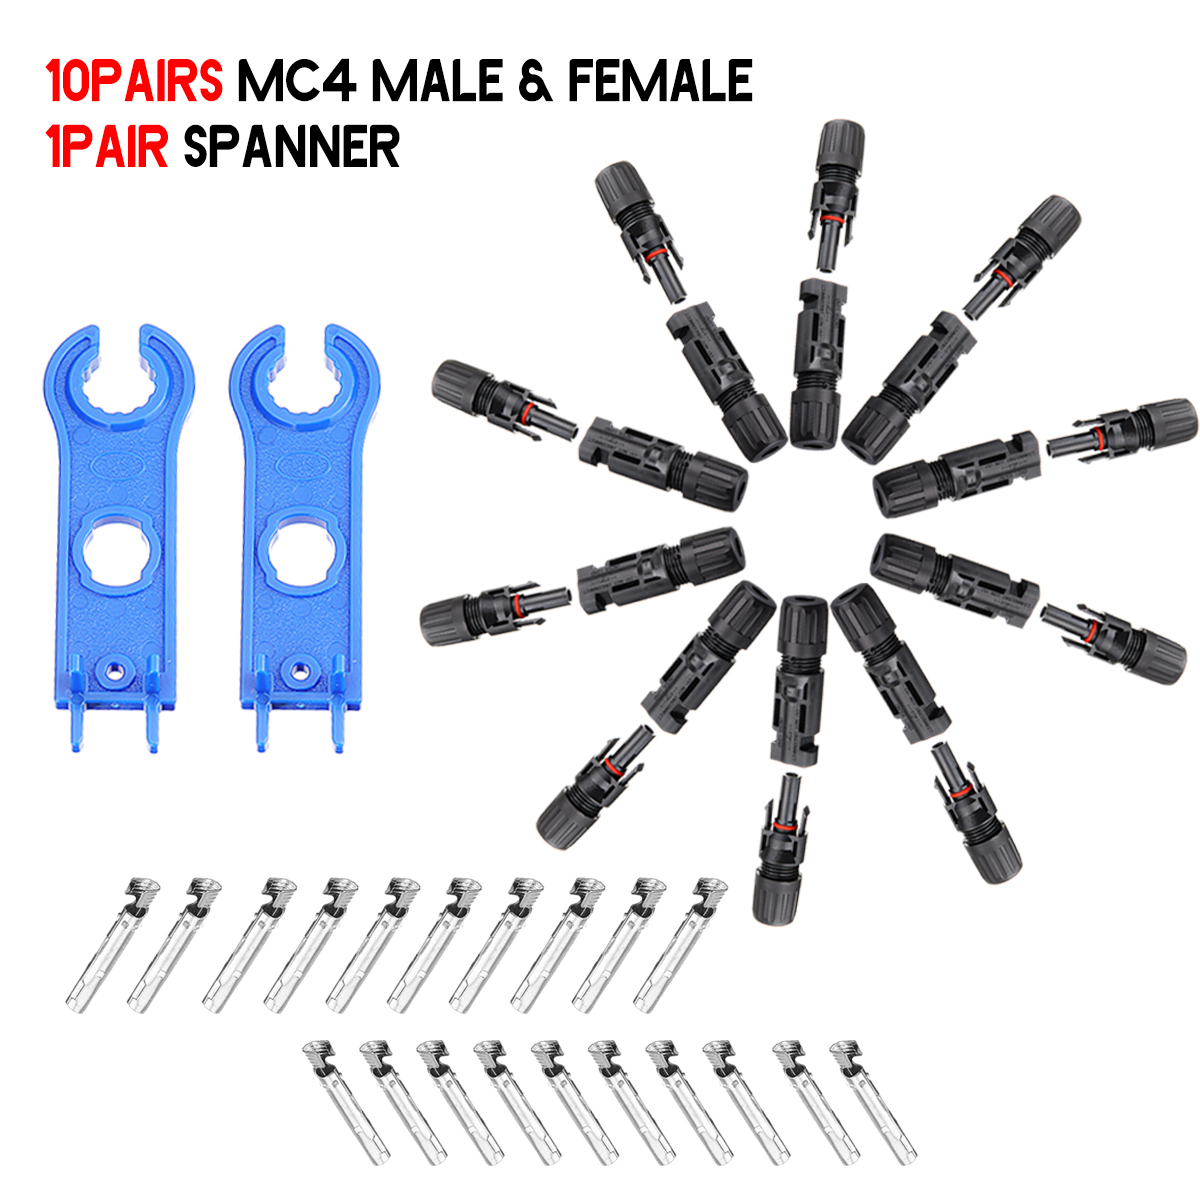 10pairs-x-Connector-1pair-Spanner-Male-Female-30A-101214AWG-Cable-Plug-Solar-Panel-System-Supply-1631958-1